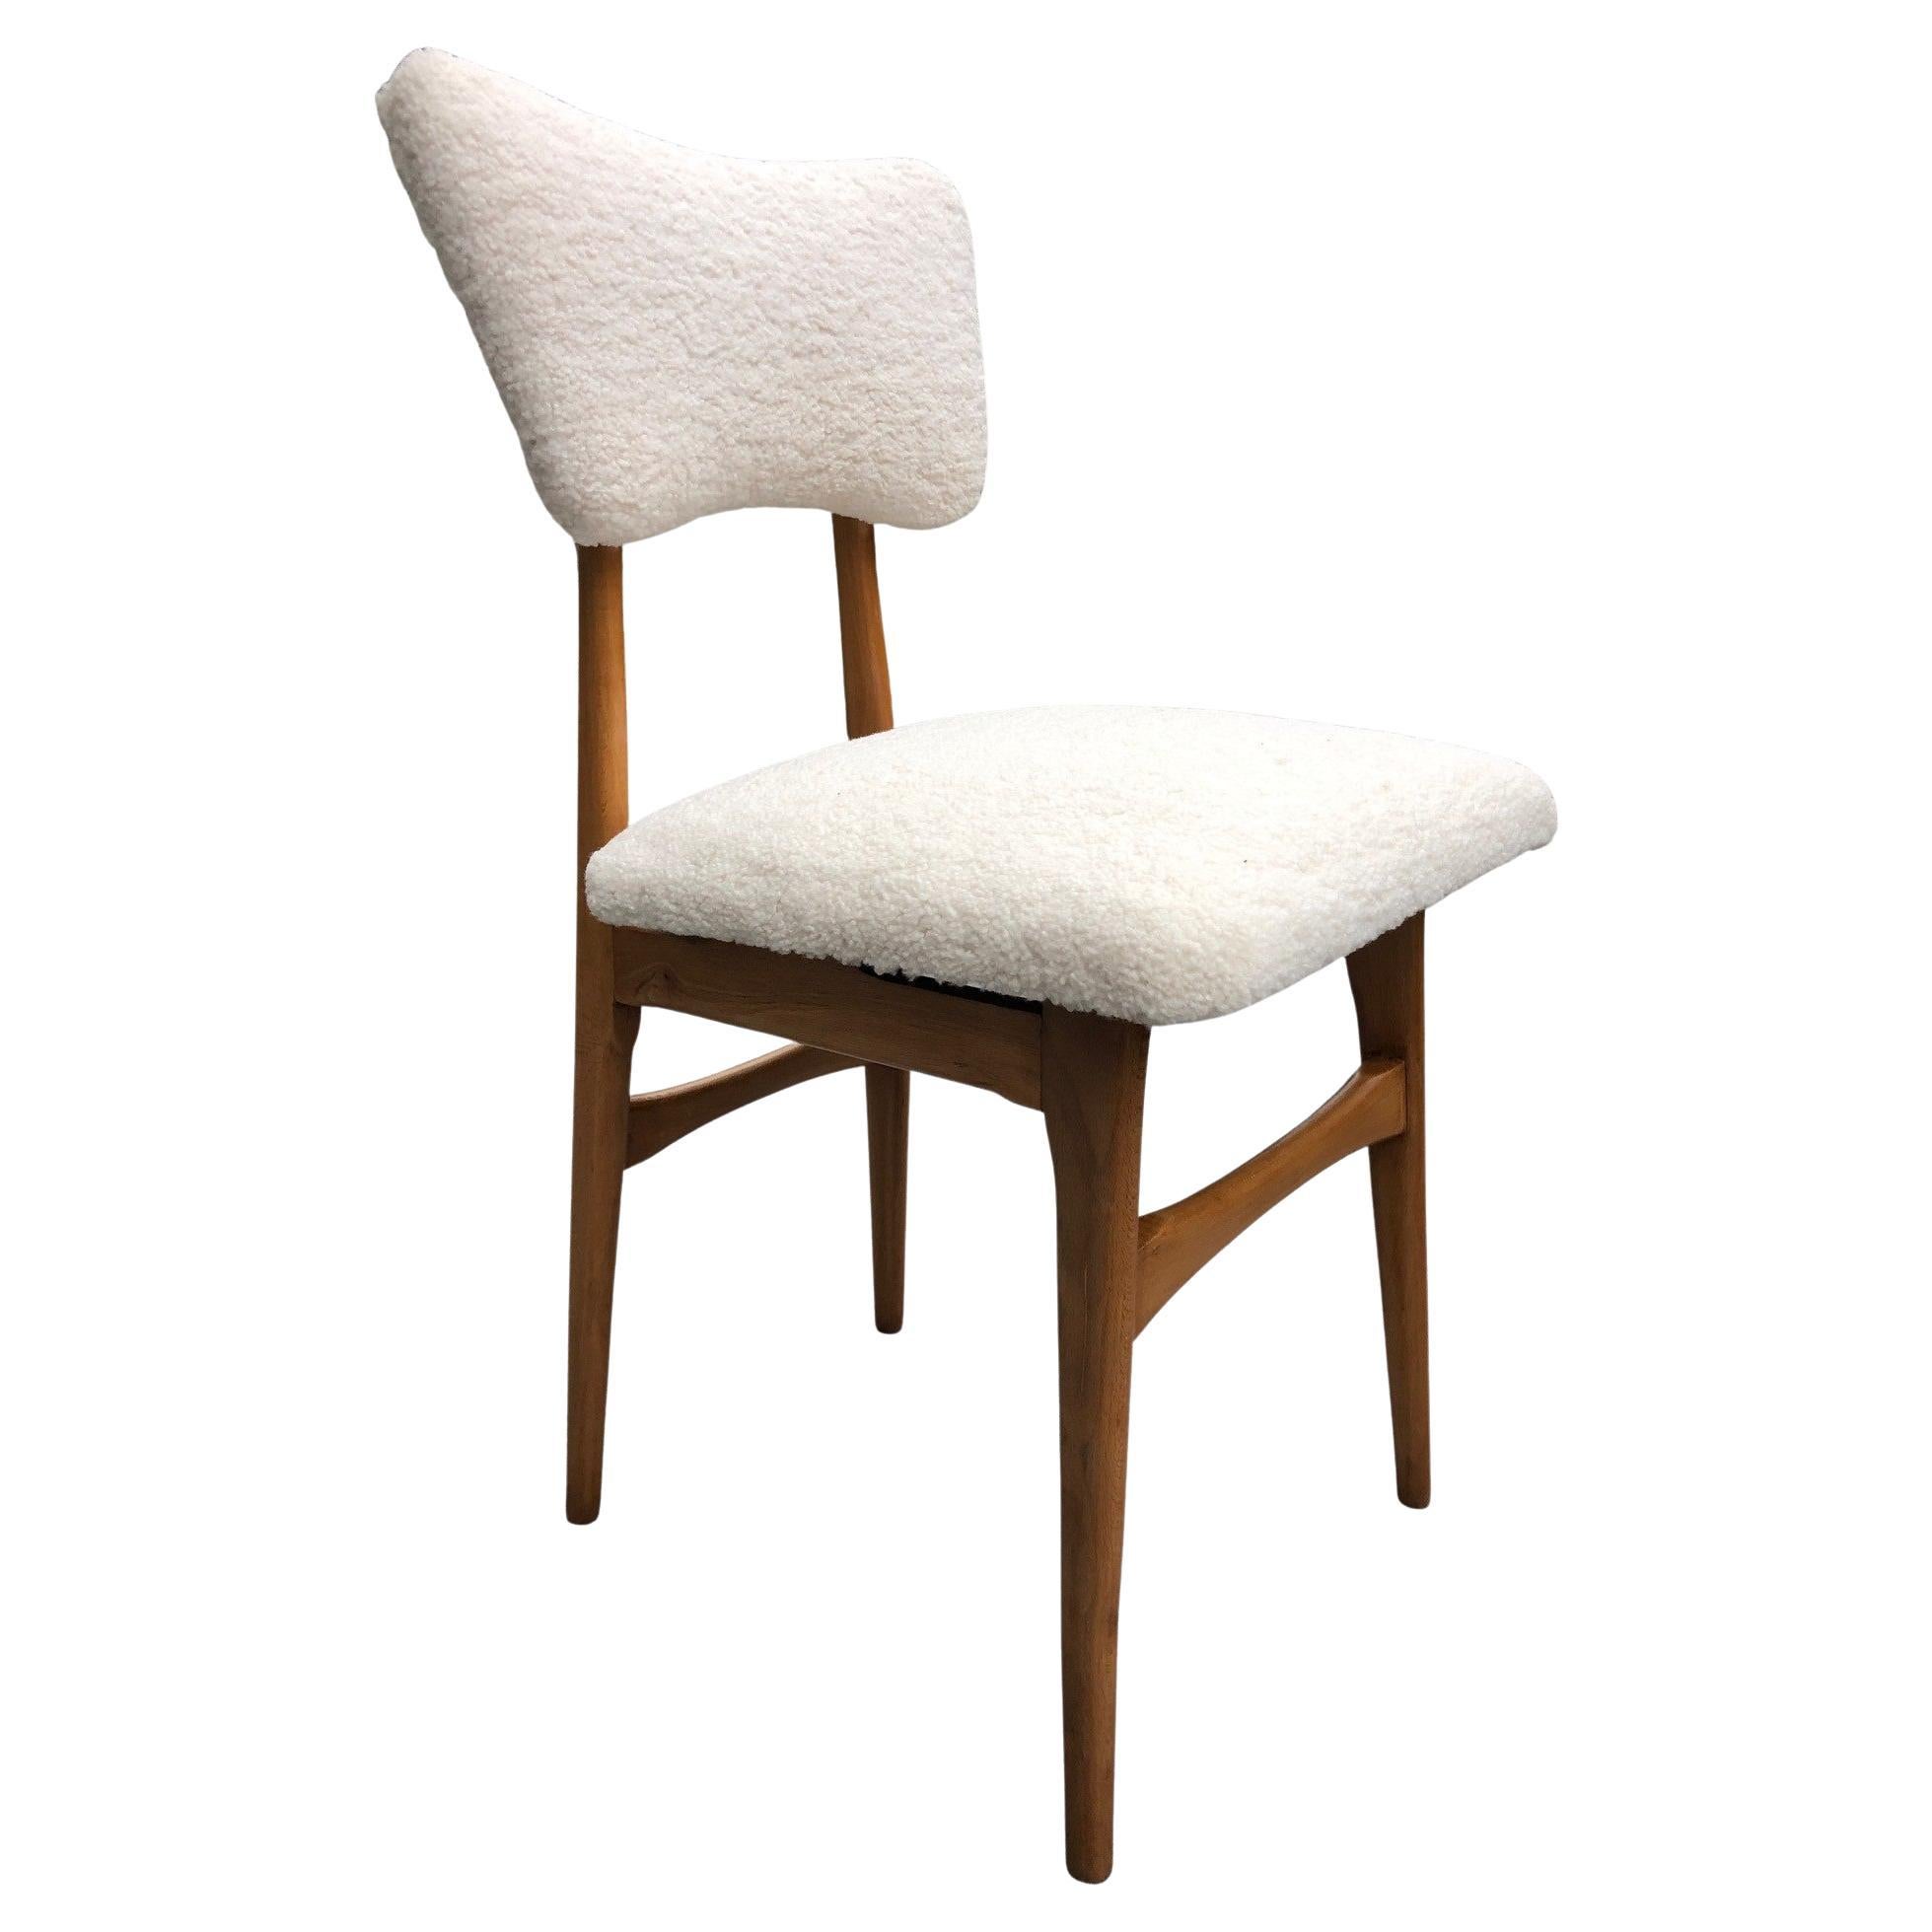 Midcentury Cream Bouclé and Wood Dining Chair, Europe, 1960s For Sale